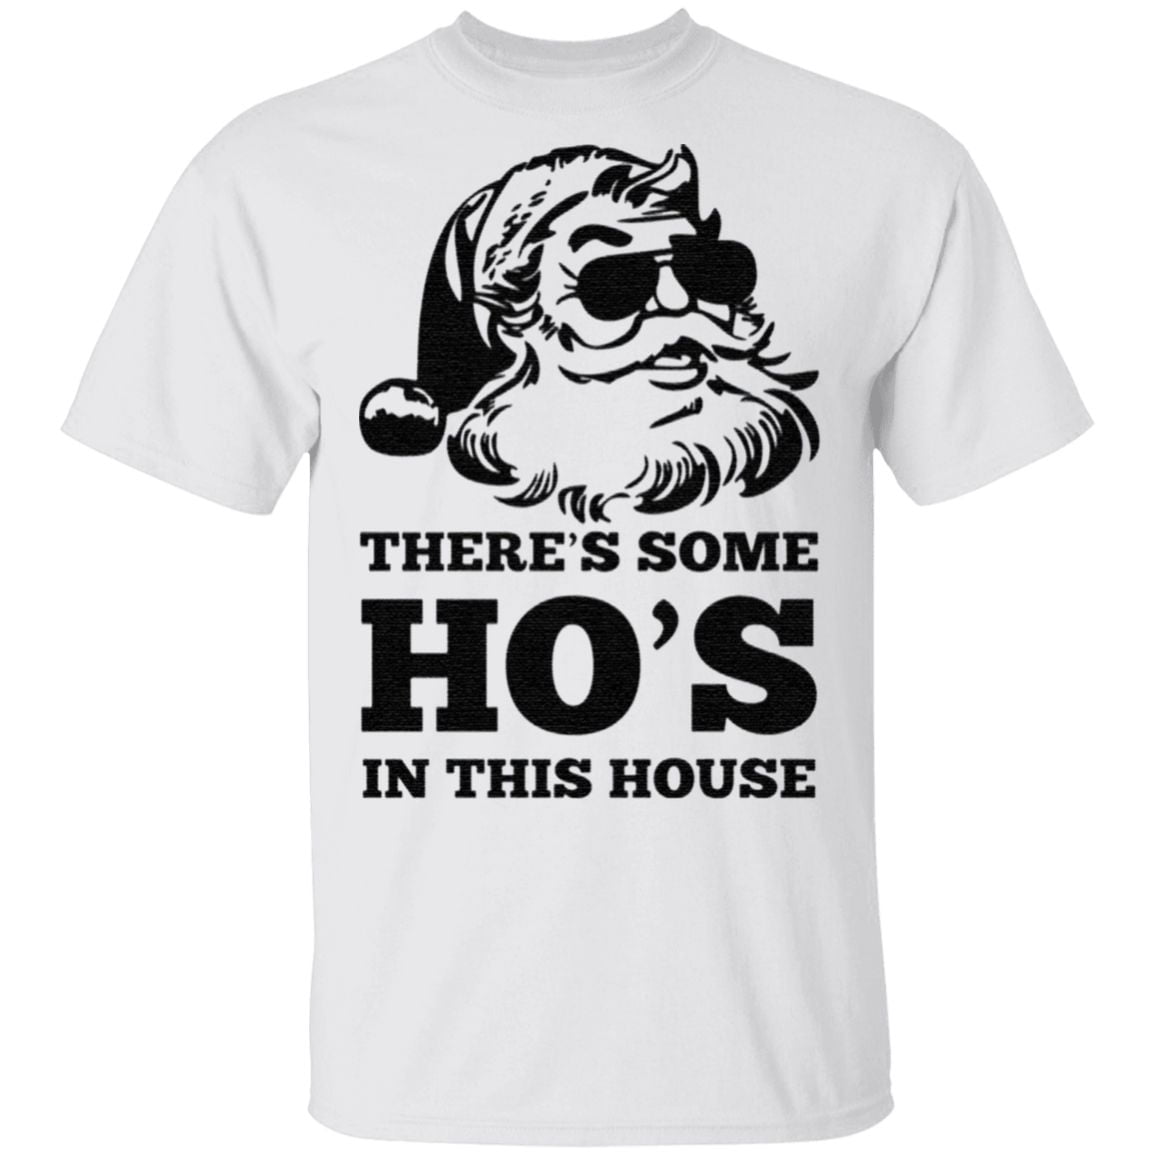 There’s some Ho’s in this house Christmas T Shirt